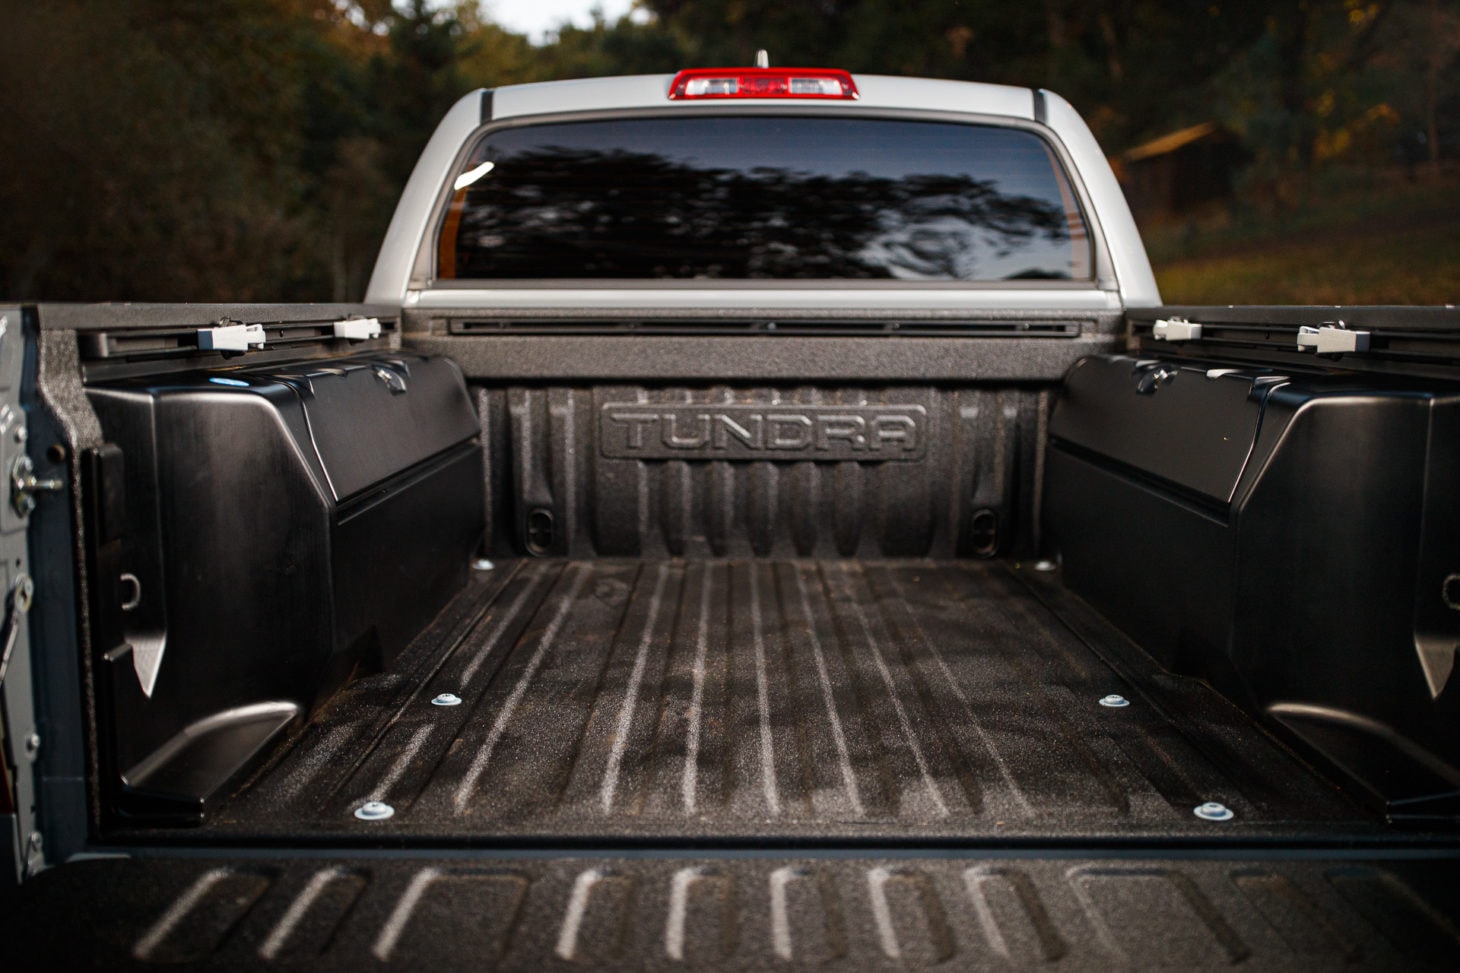 View of an empty truck bed